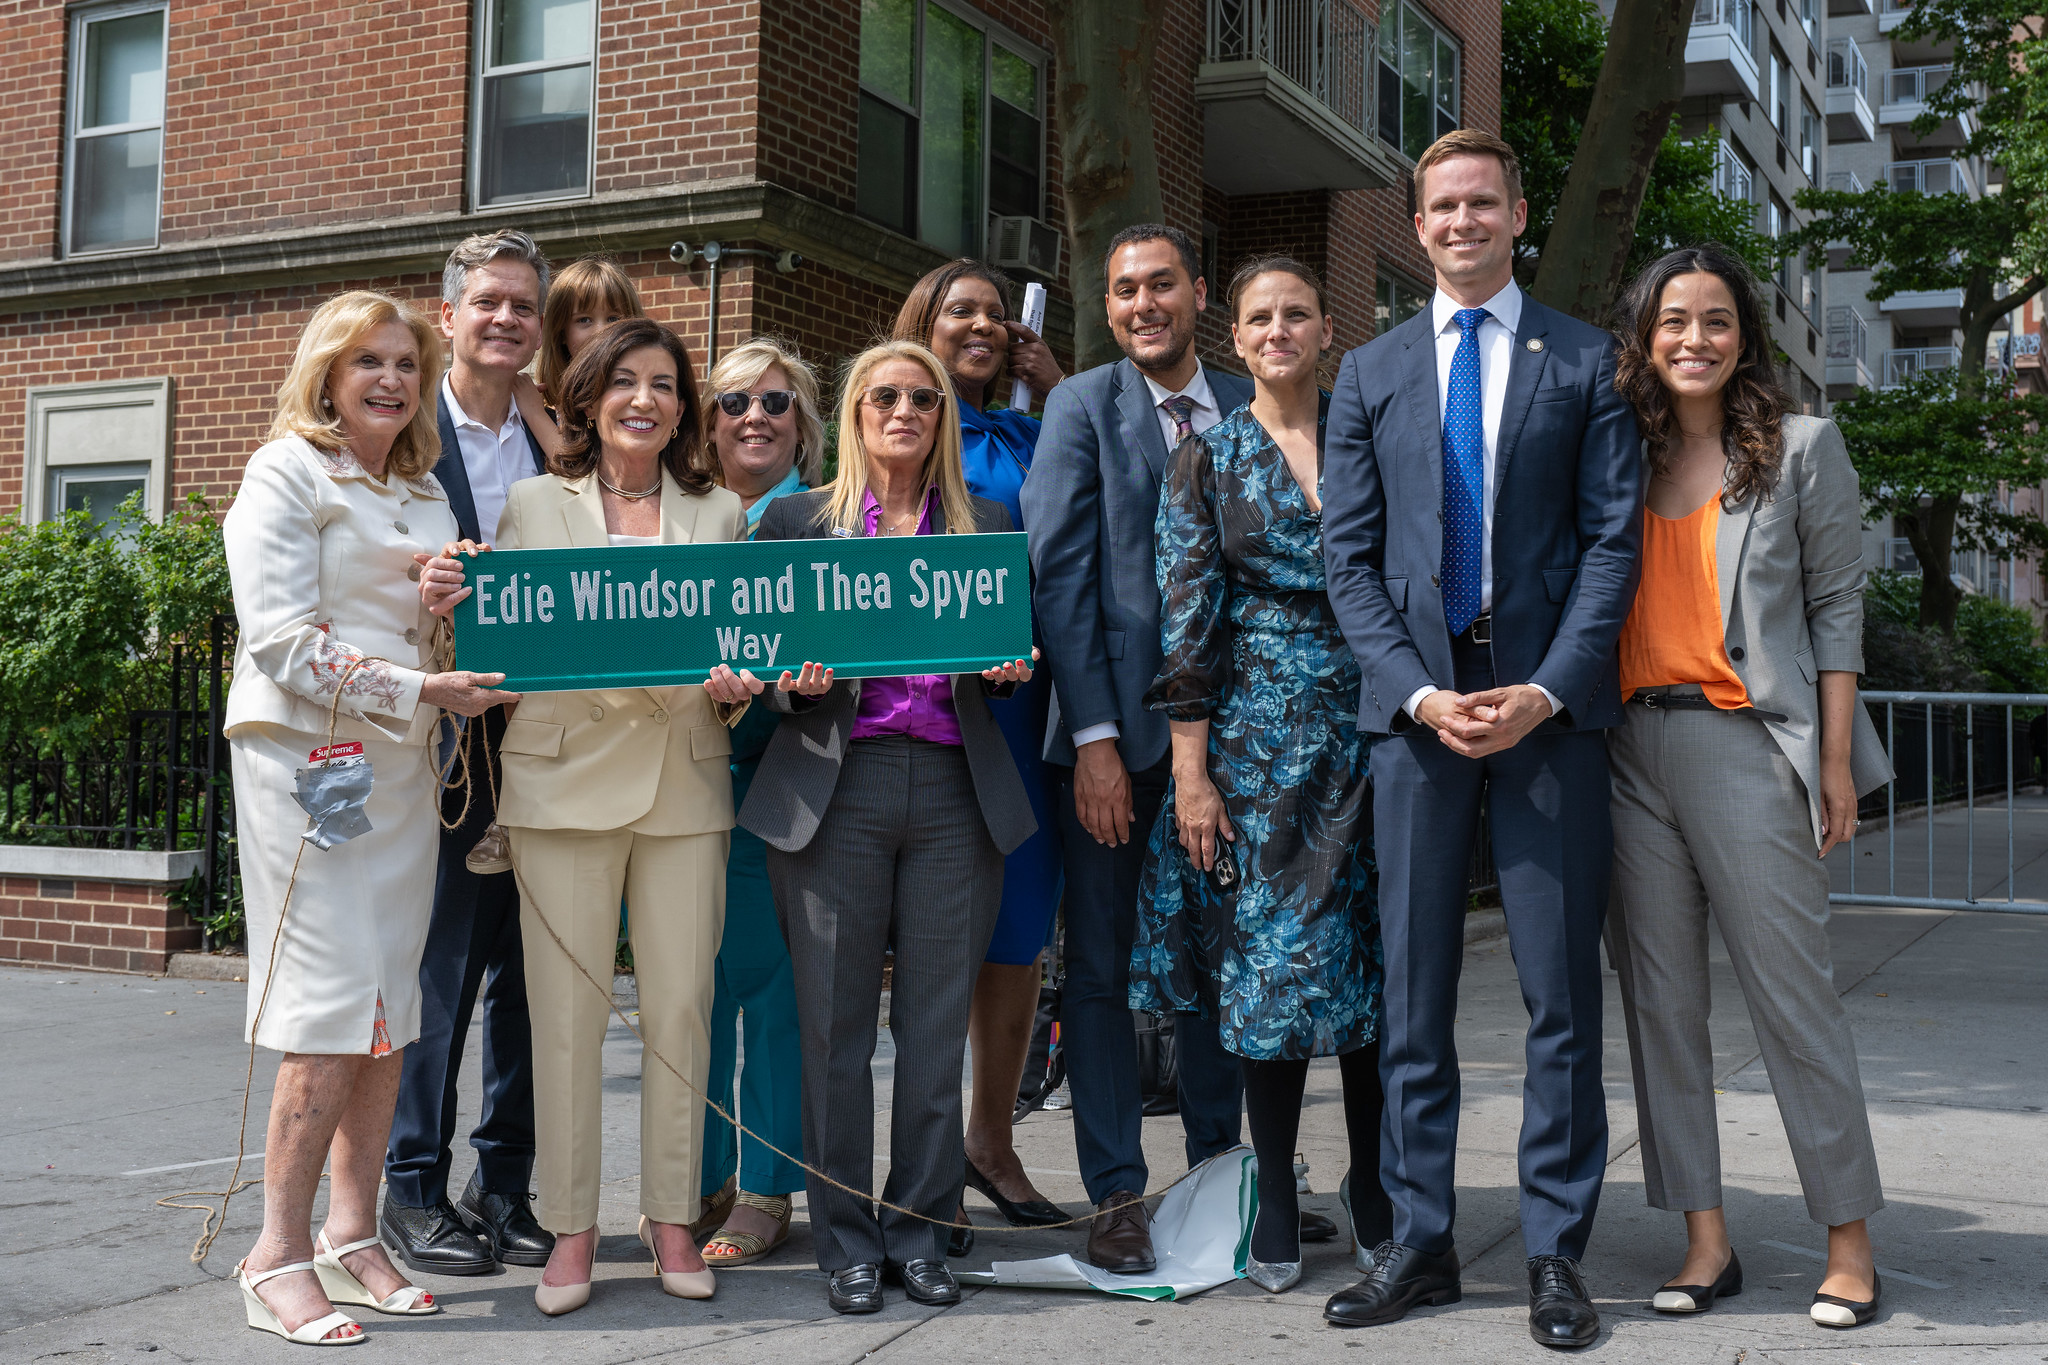 NY Governor Kathy Hochul Leads Unveiling and Dedication of “Edie Windsor And Thea Spyer Way” Street Sign